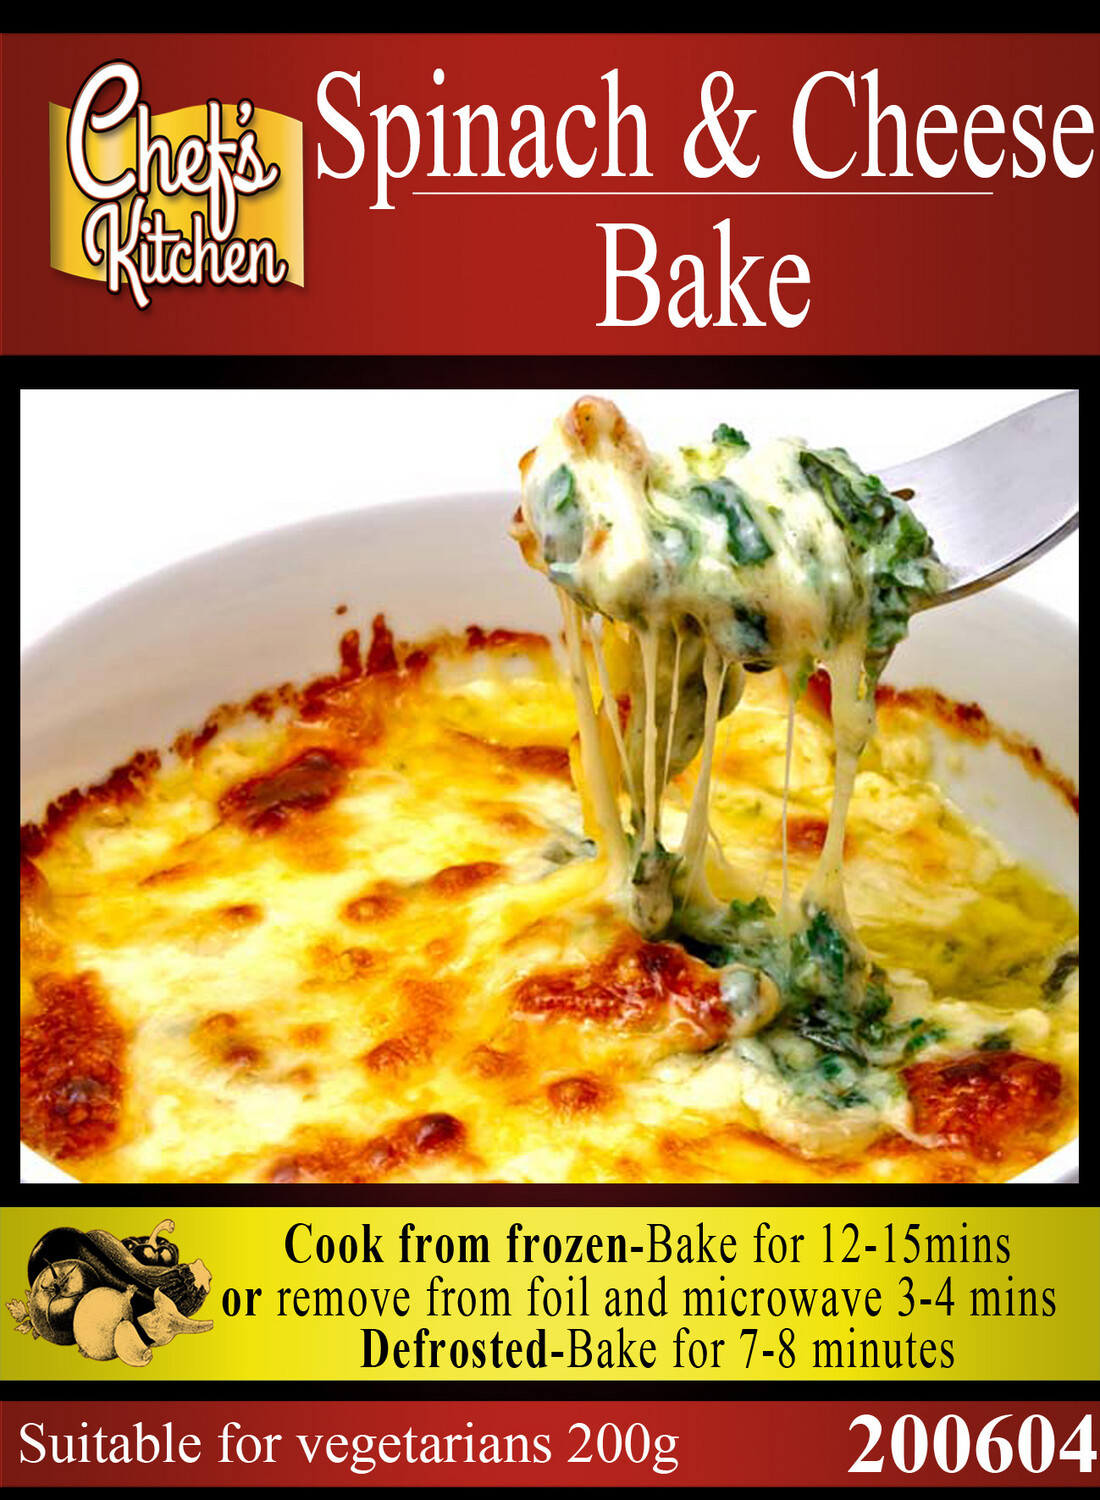 Spinach and Cheese Bake